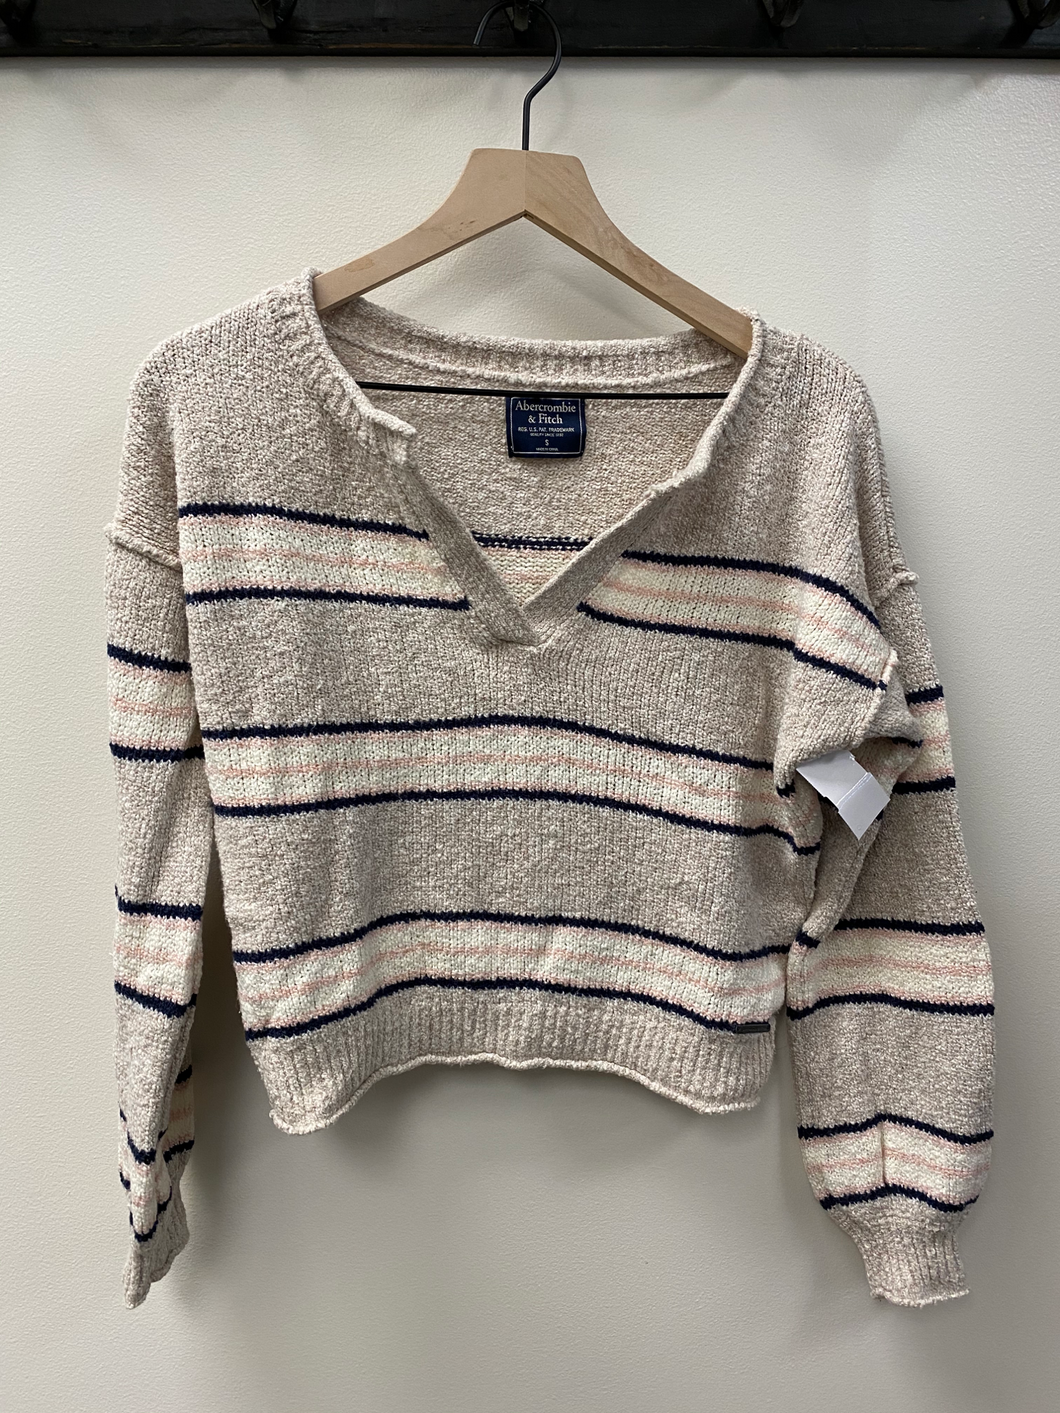 Abercrombie & Fitch Sweater Size Small